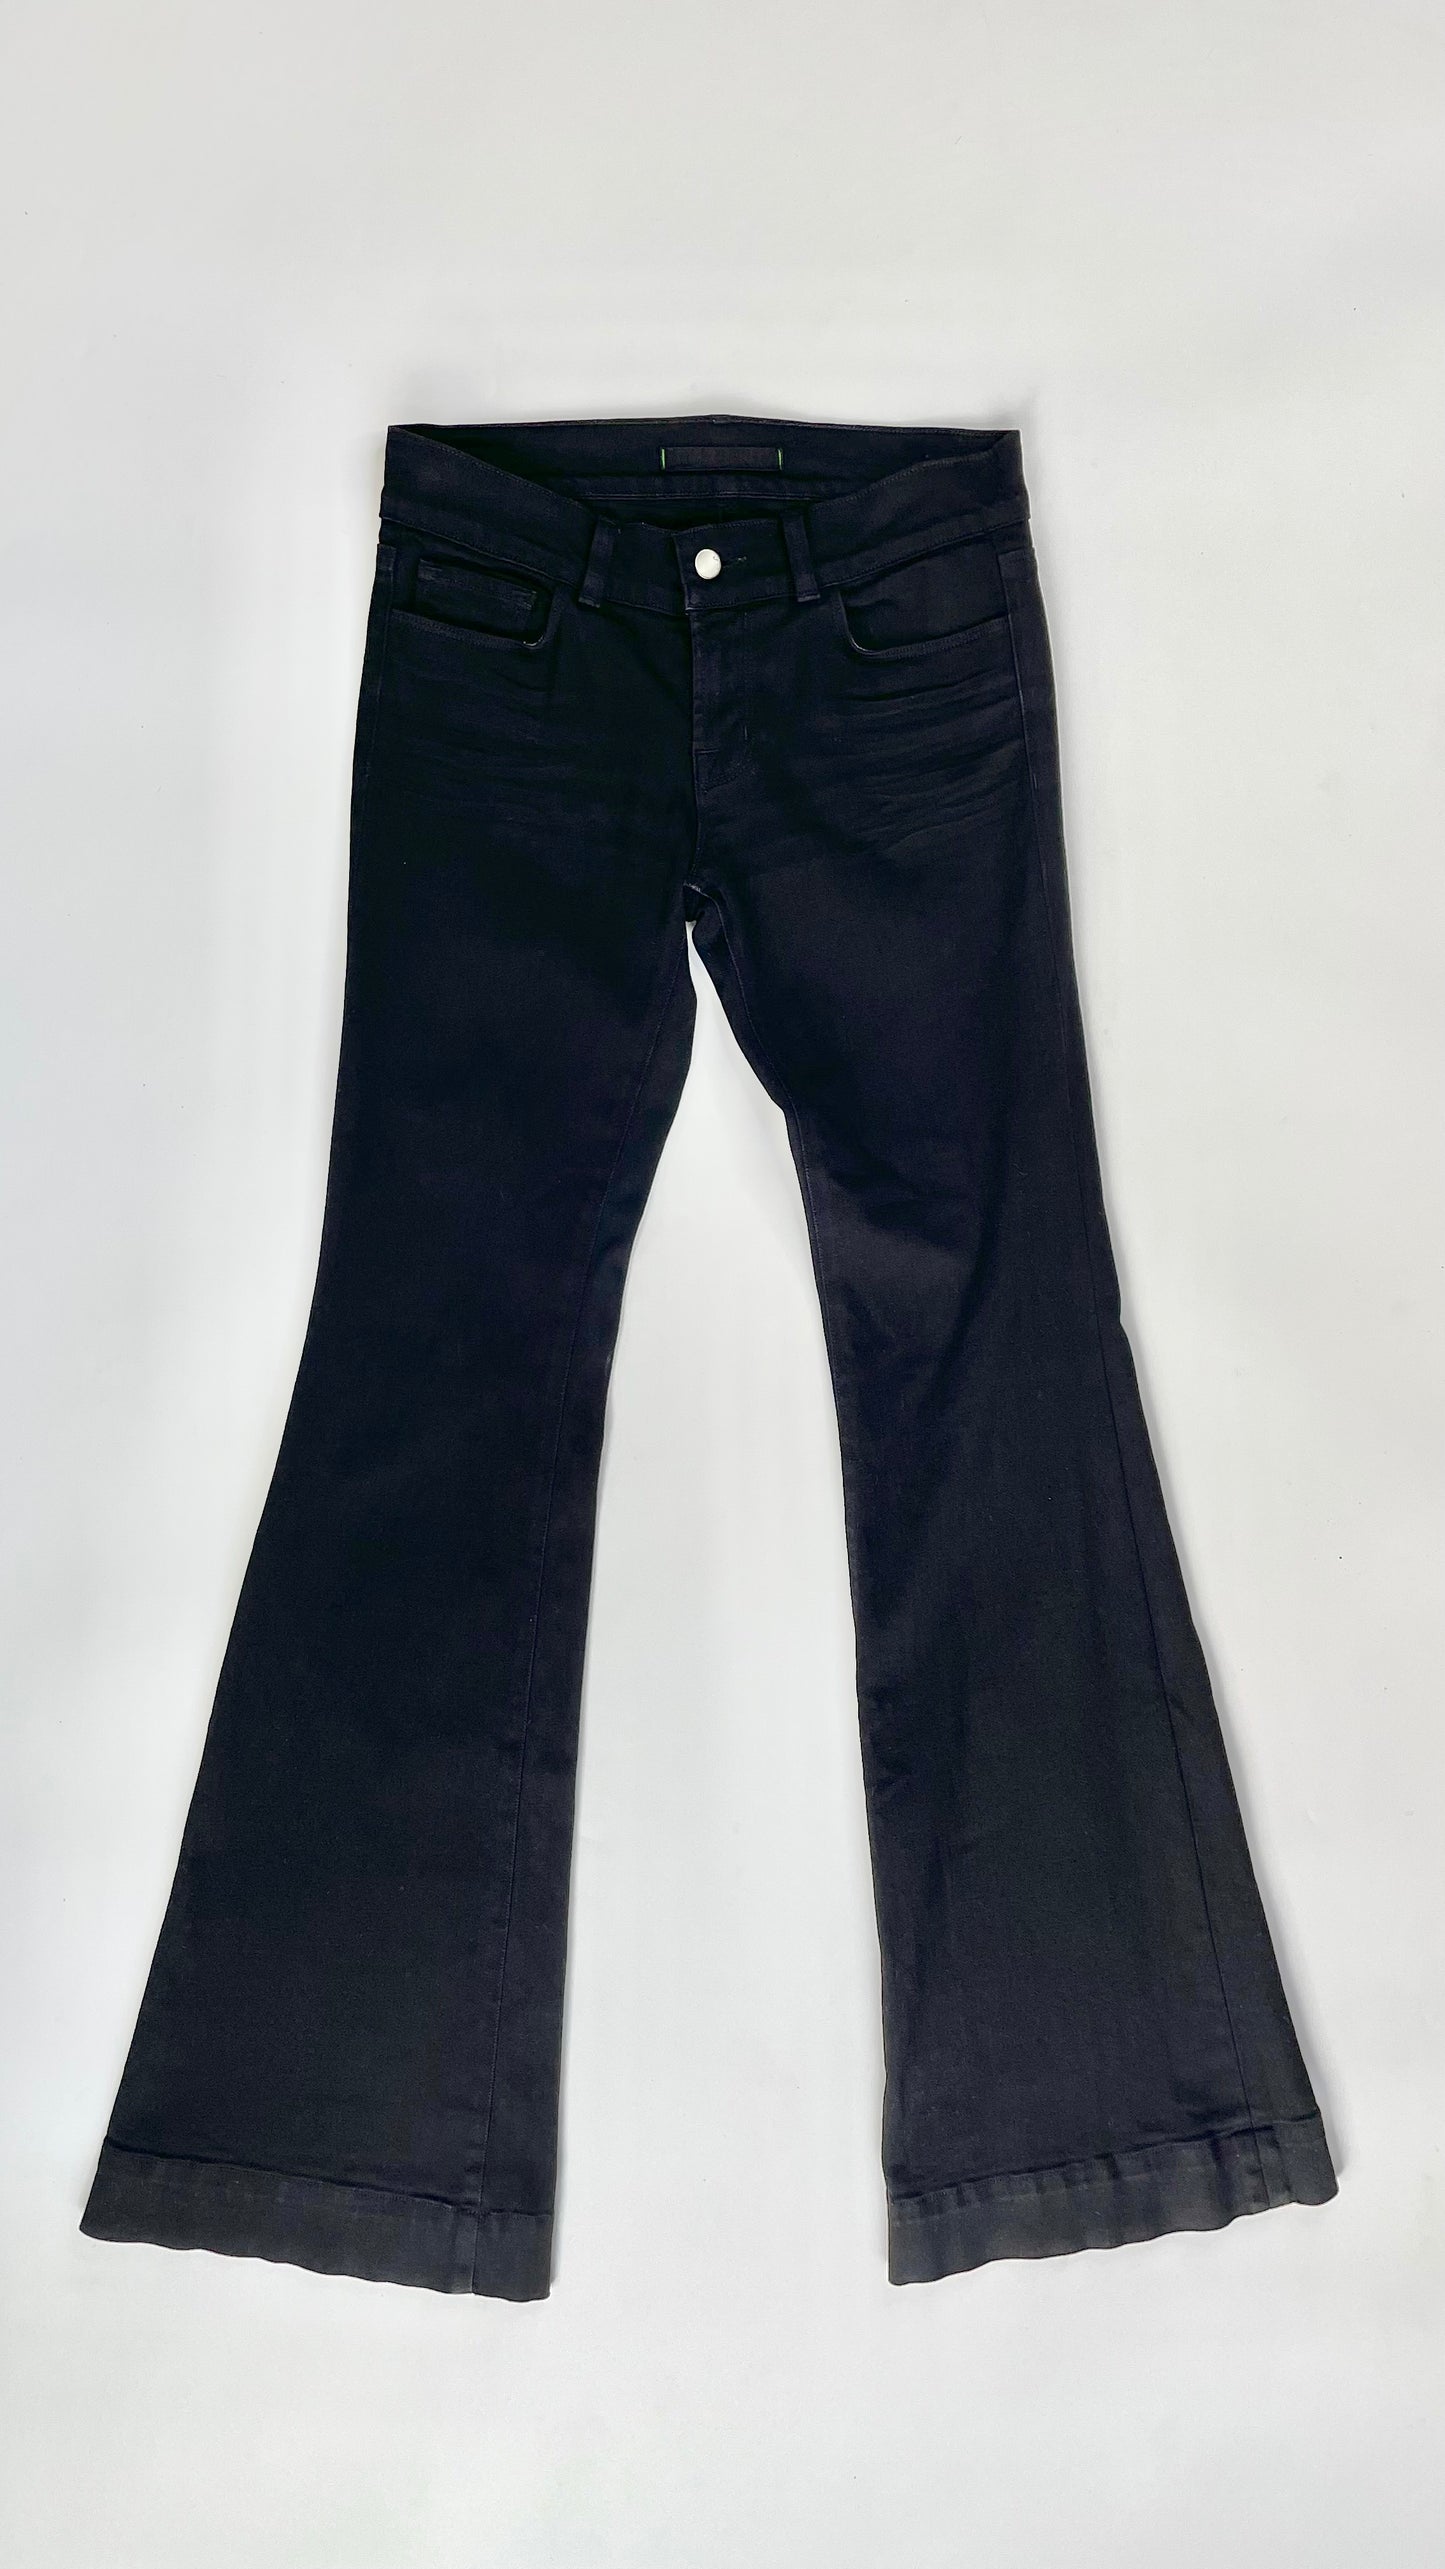 Pre-Loved J-BRAND black low rise flared jeans - Size 27